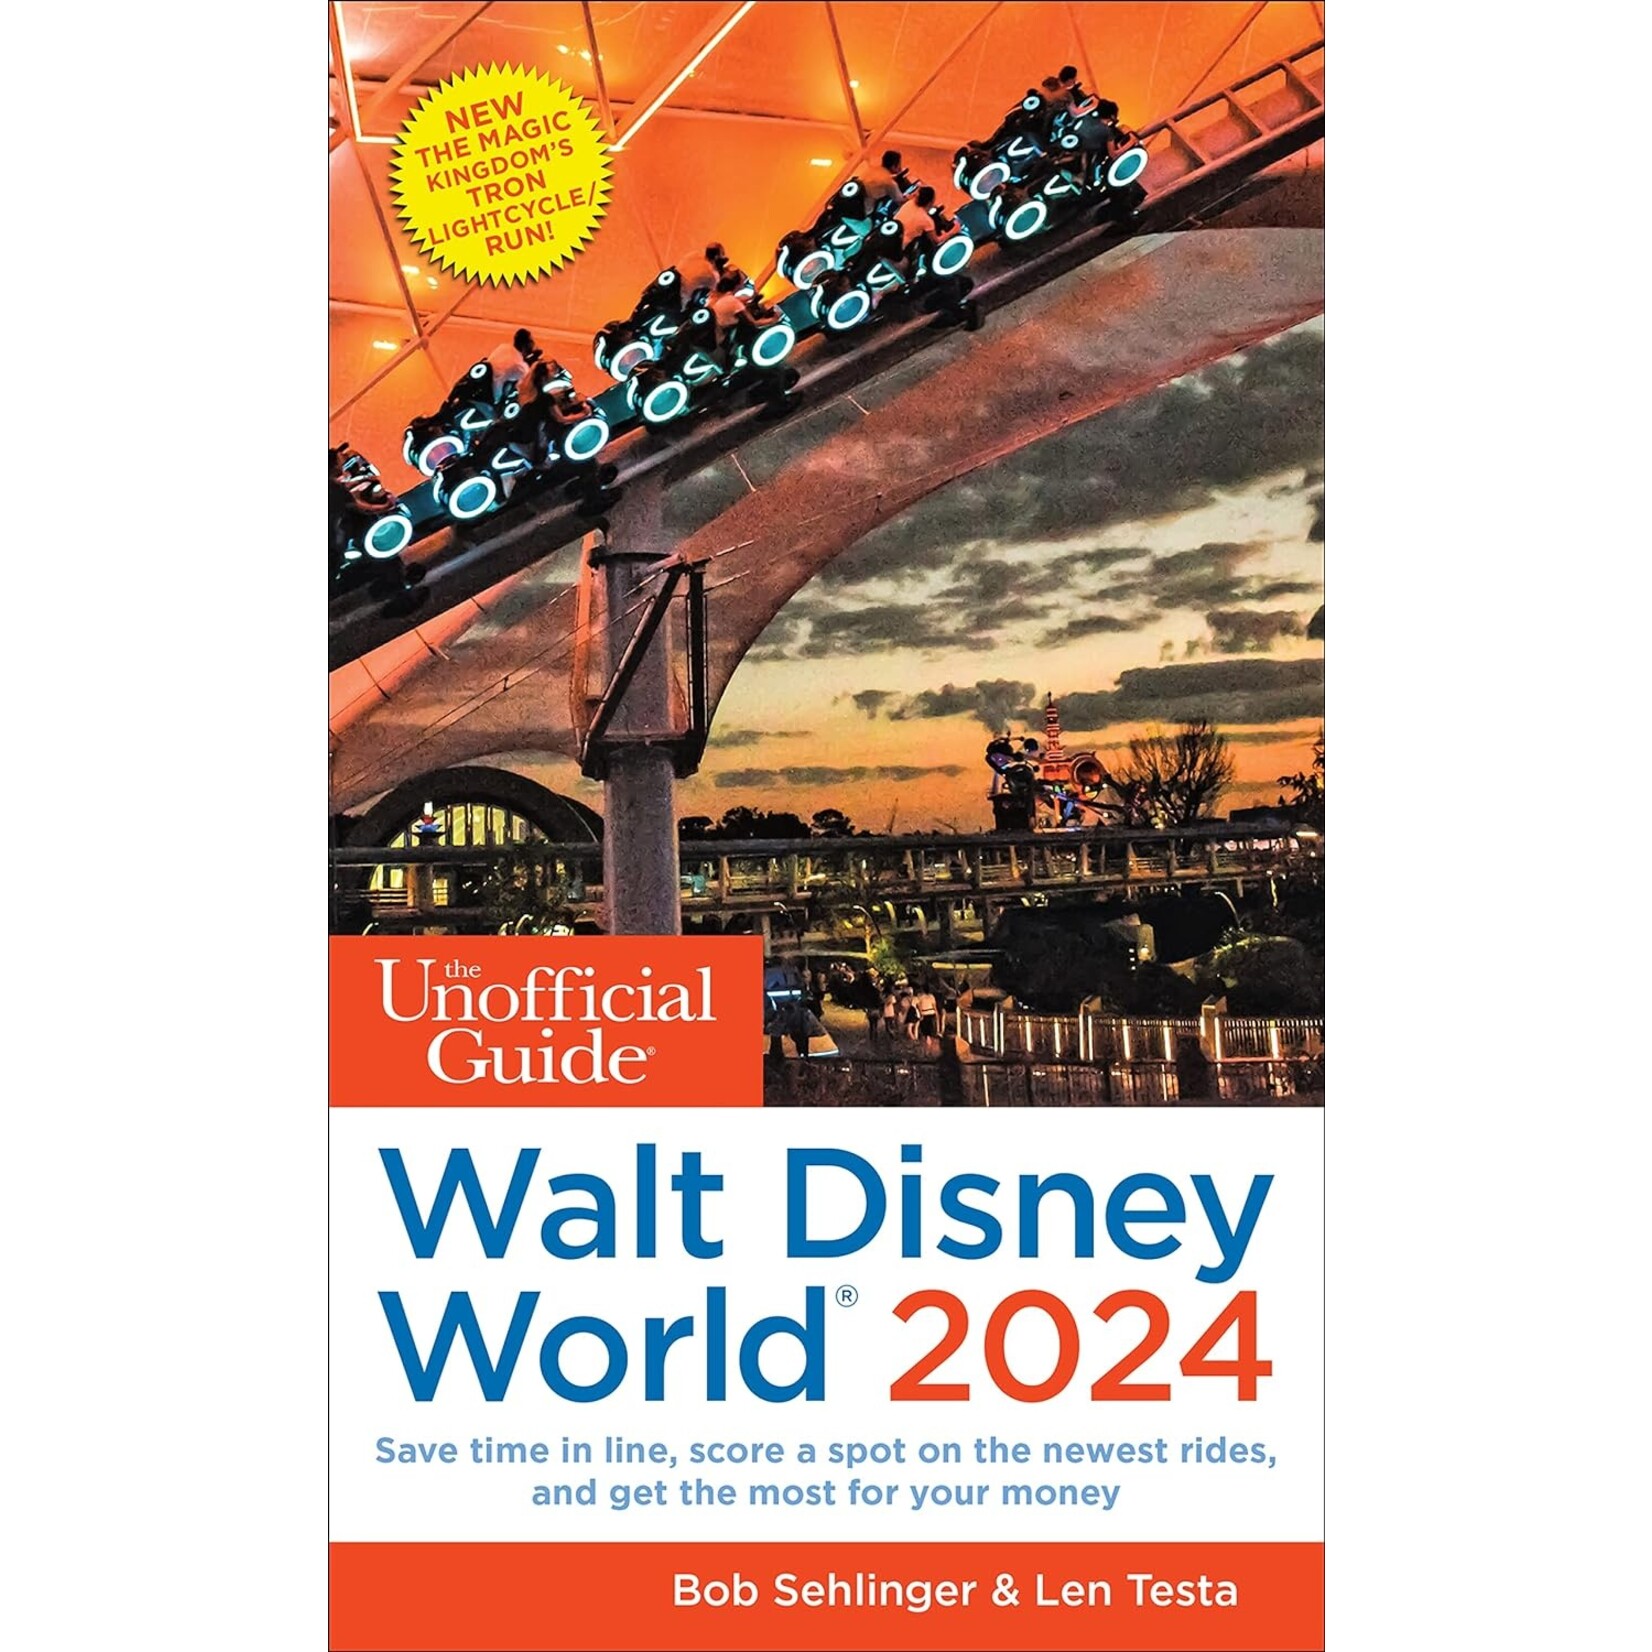 UnOfficial Guide to Walt Disney World